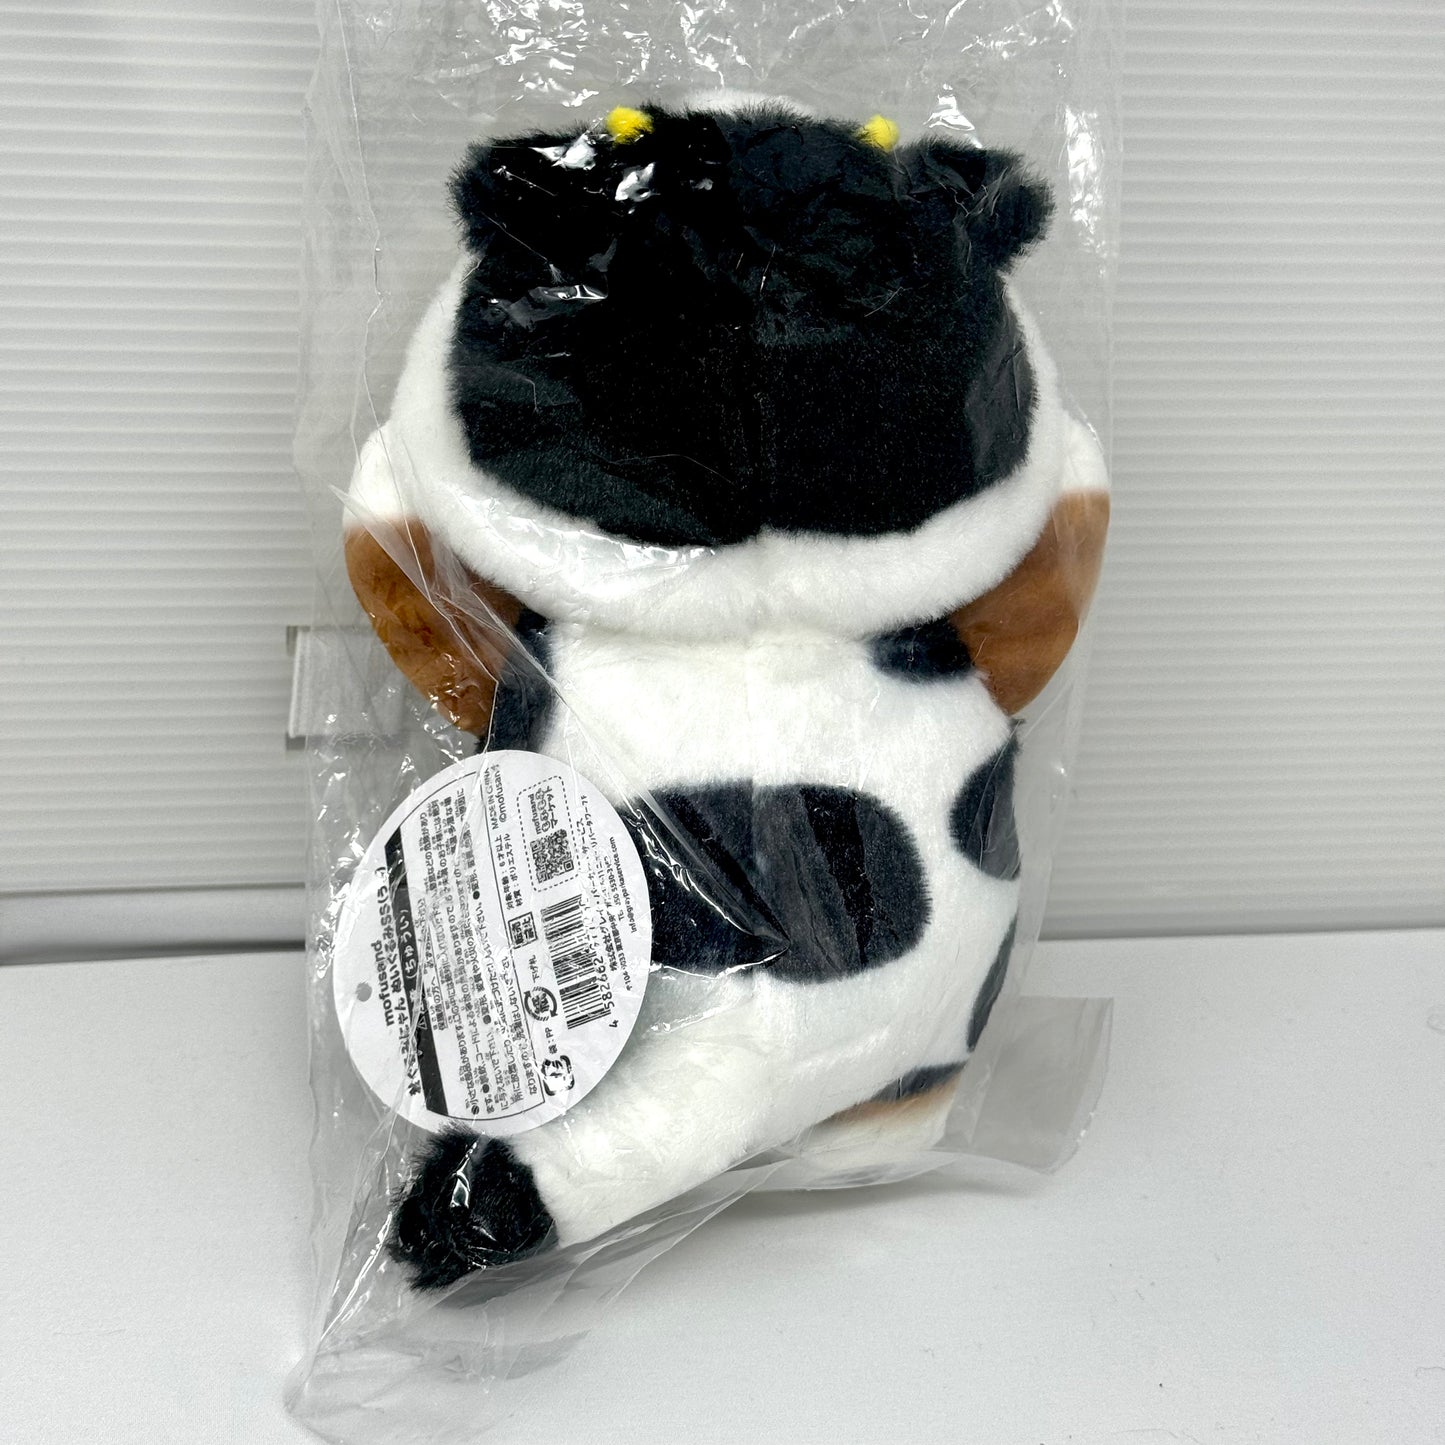 MOFUSAND COW CAT PLUSH 7" SS (NEW) Authentic Japanese Product - USA SHIP! NWT